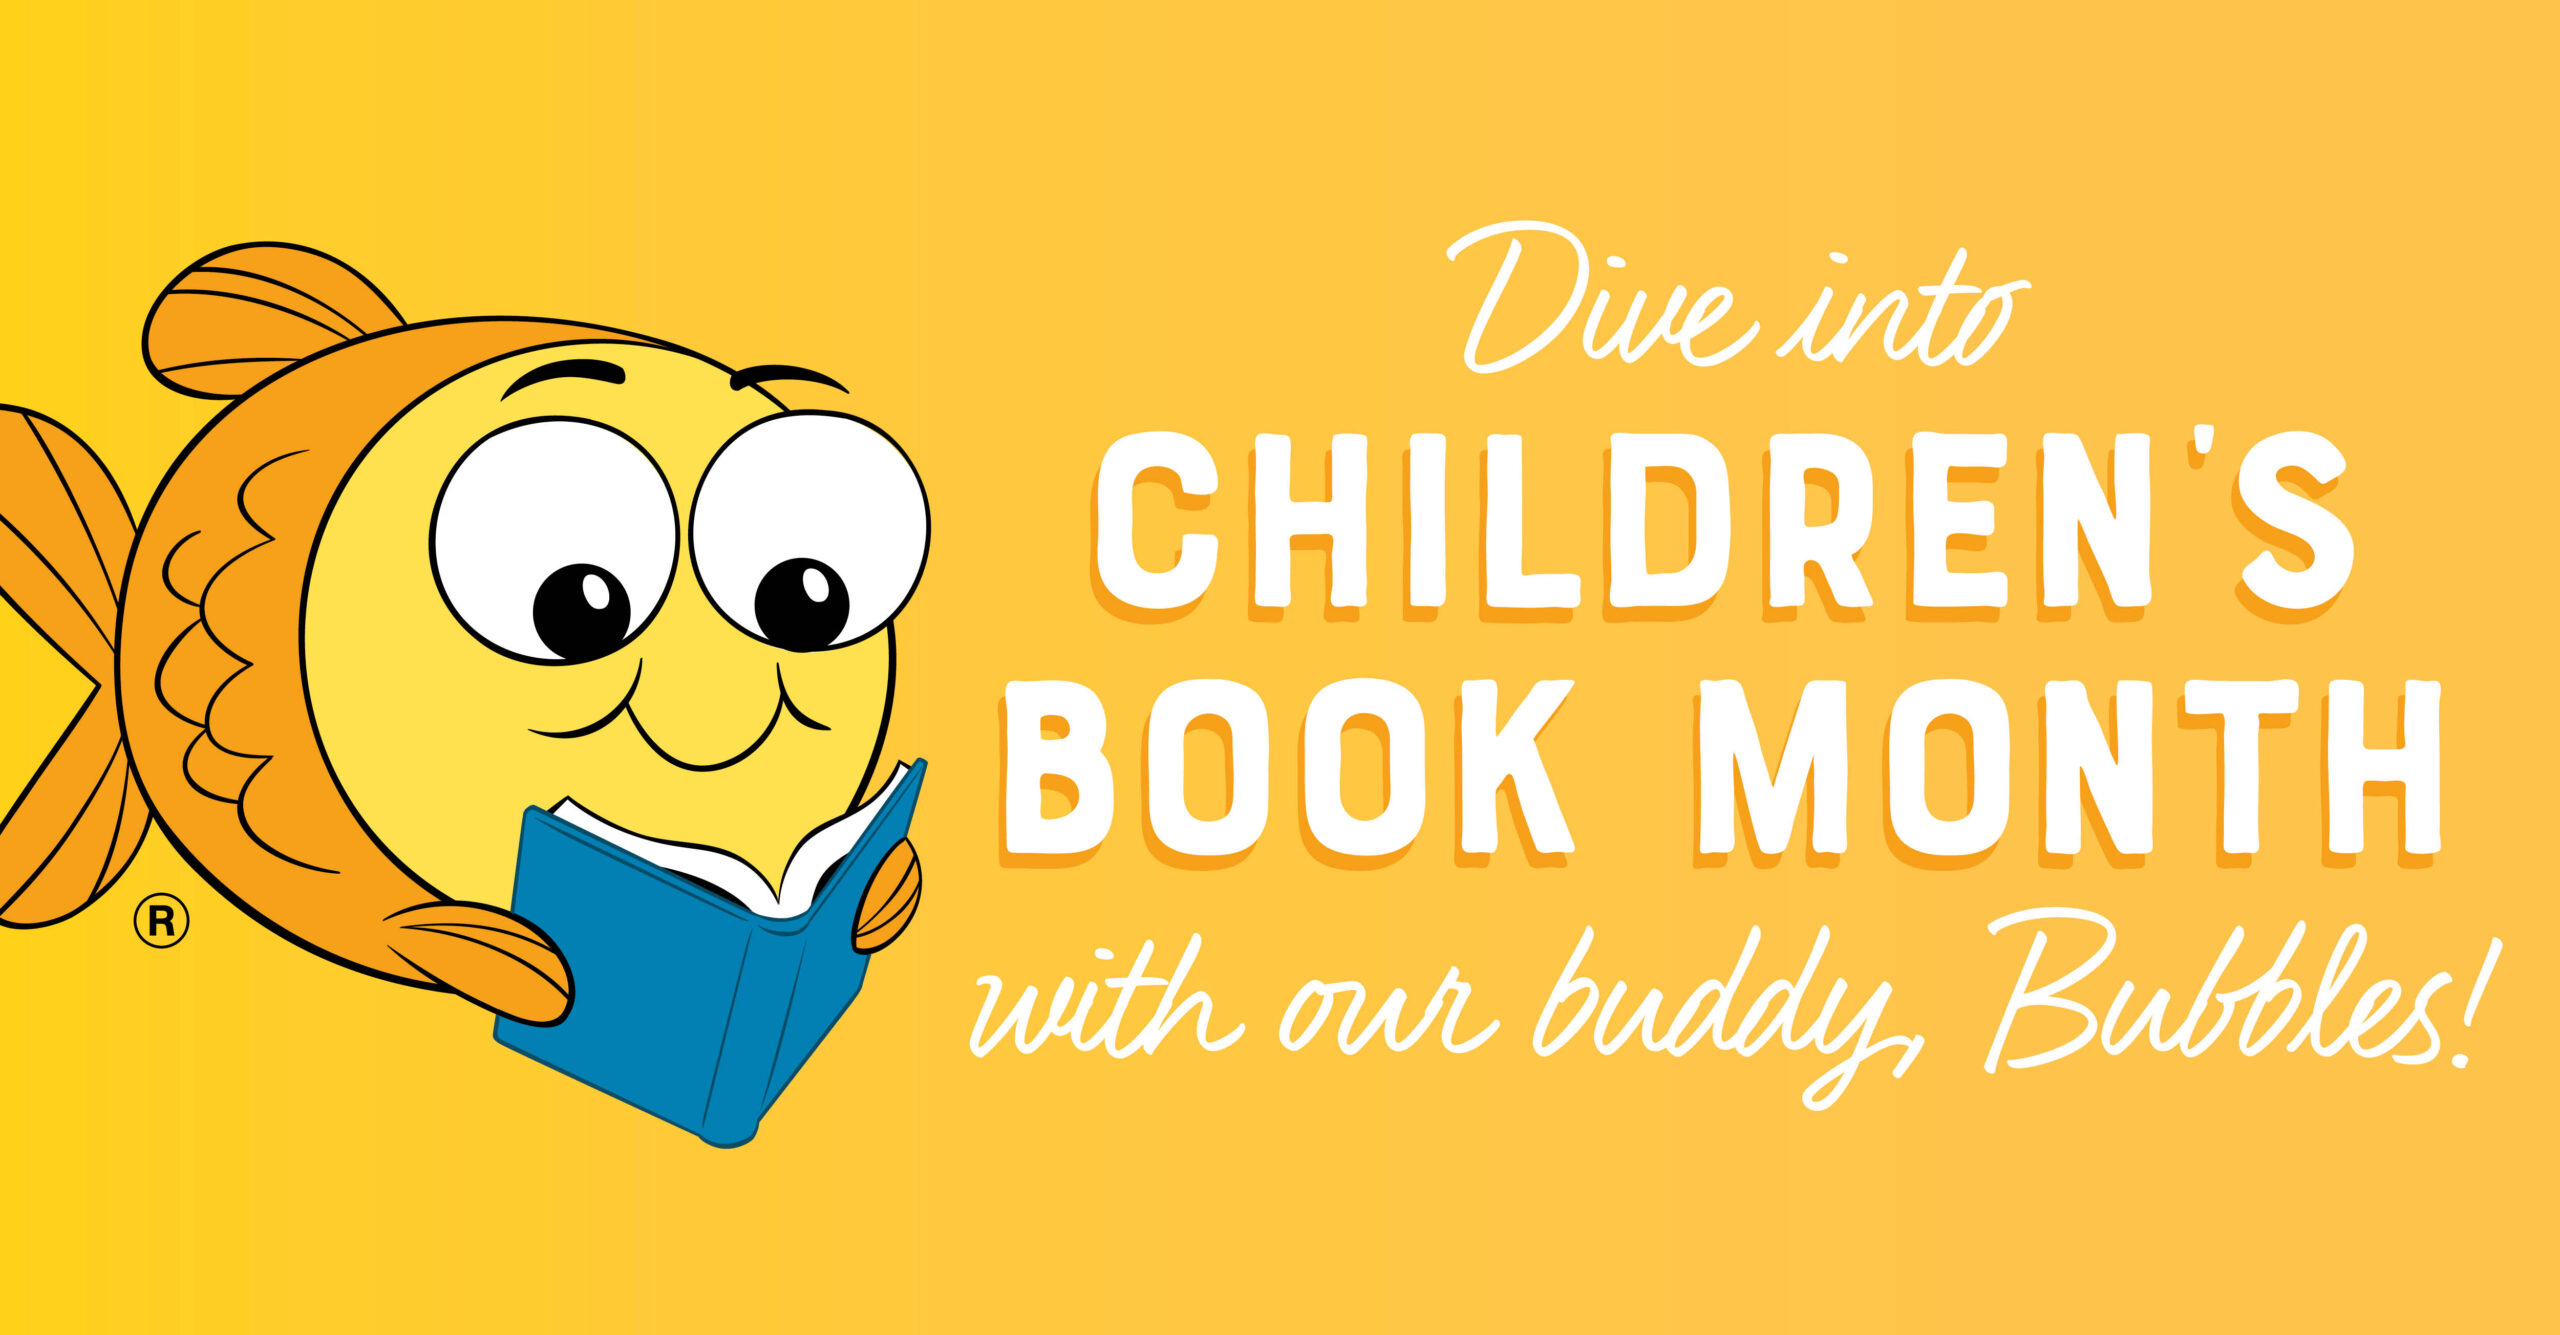 There's no better way to celebrate Children's Book Month than with our favorite books!